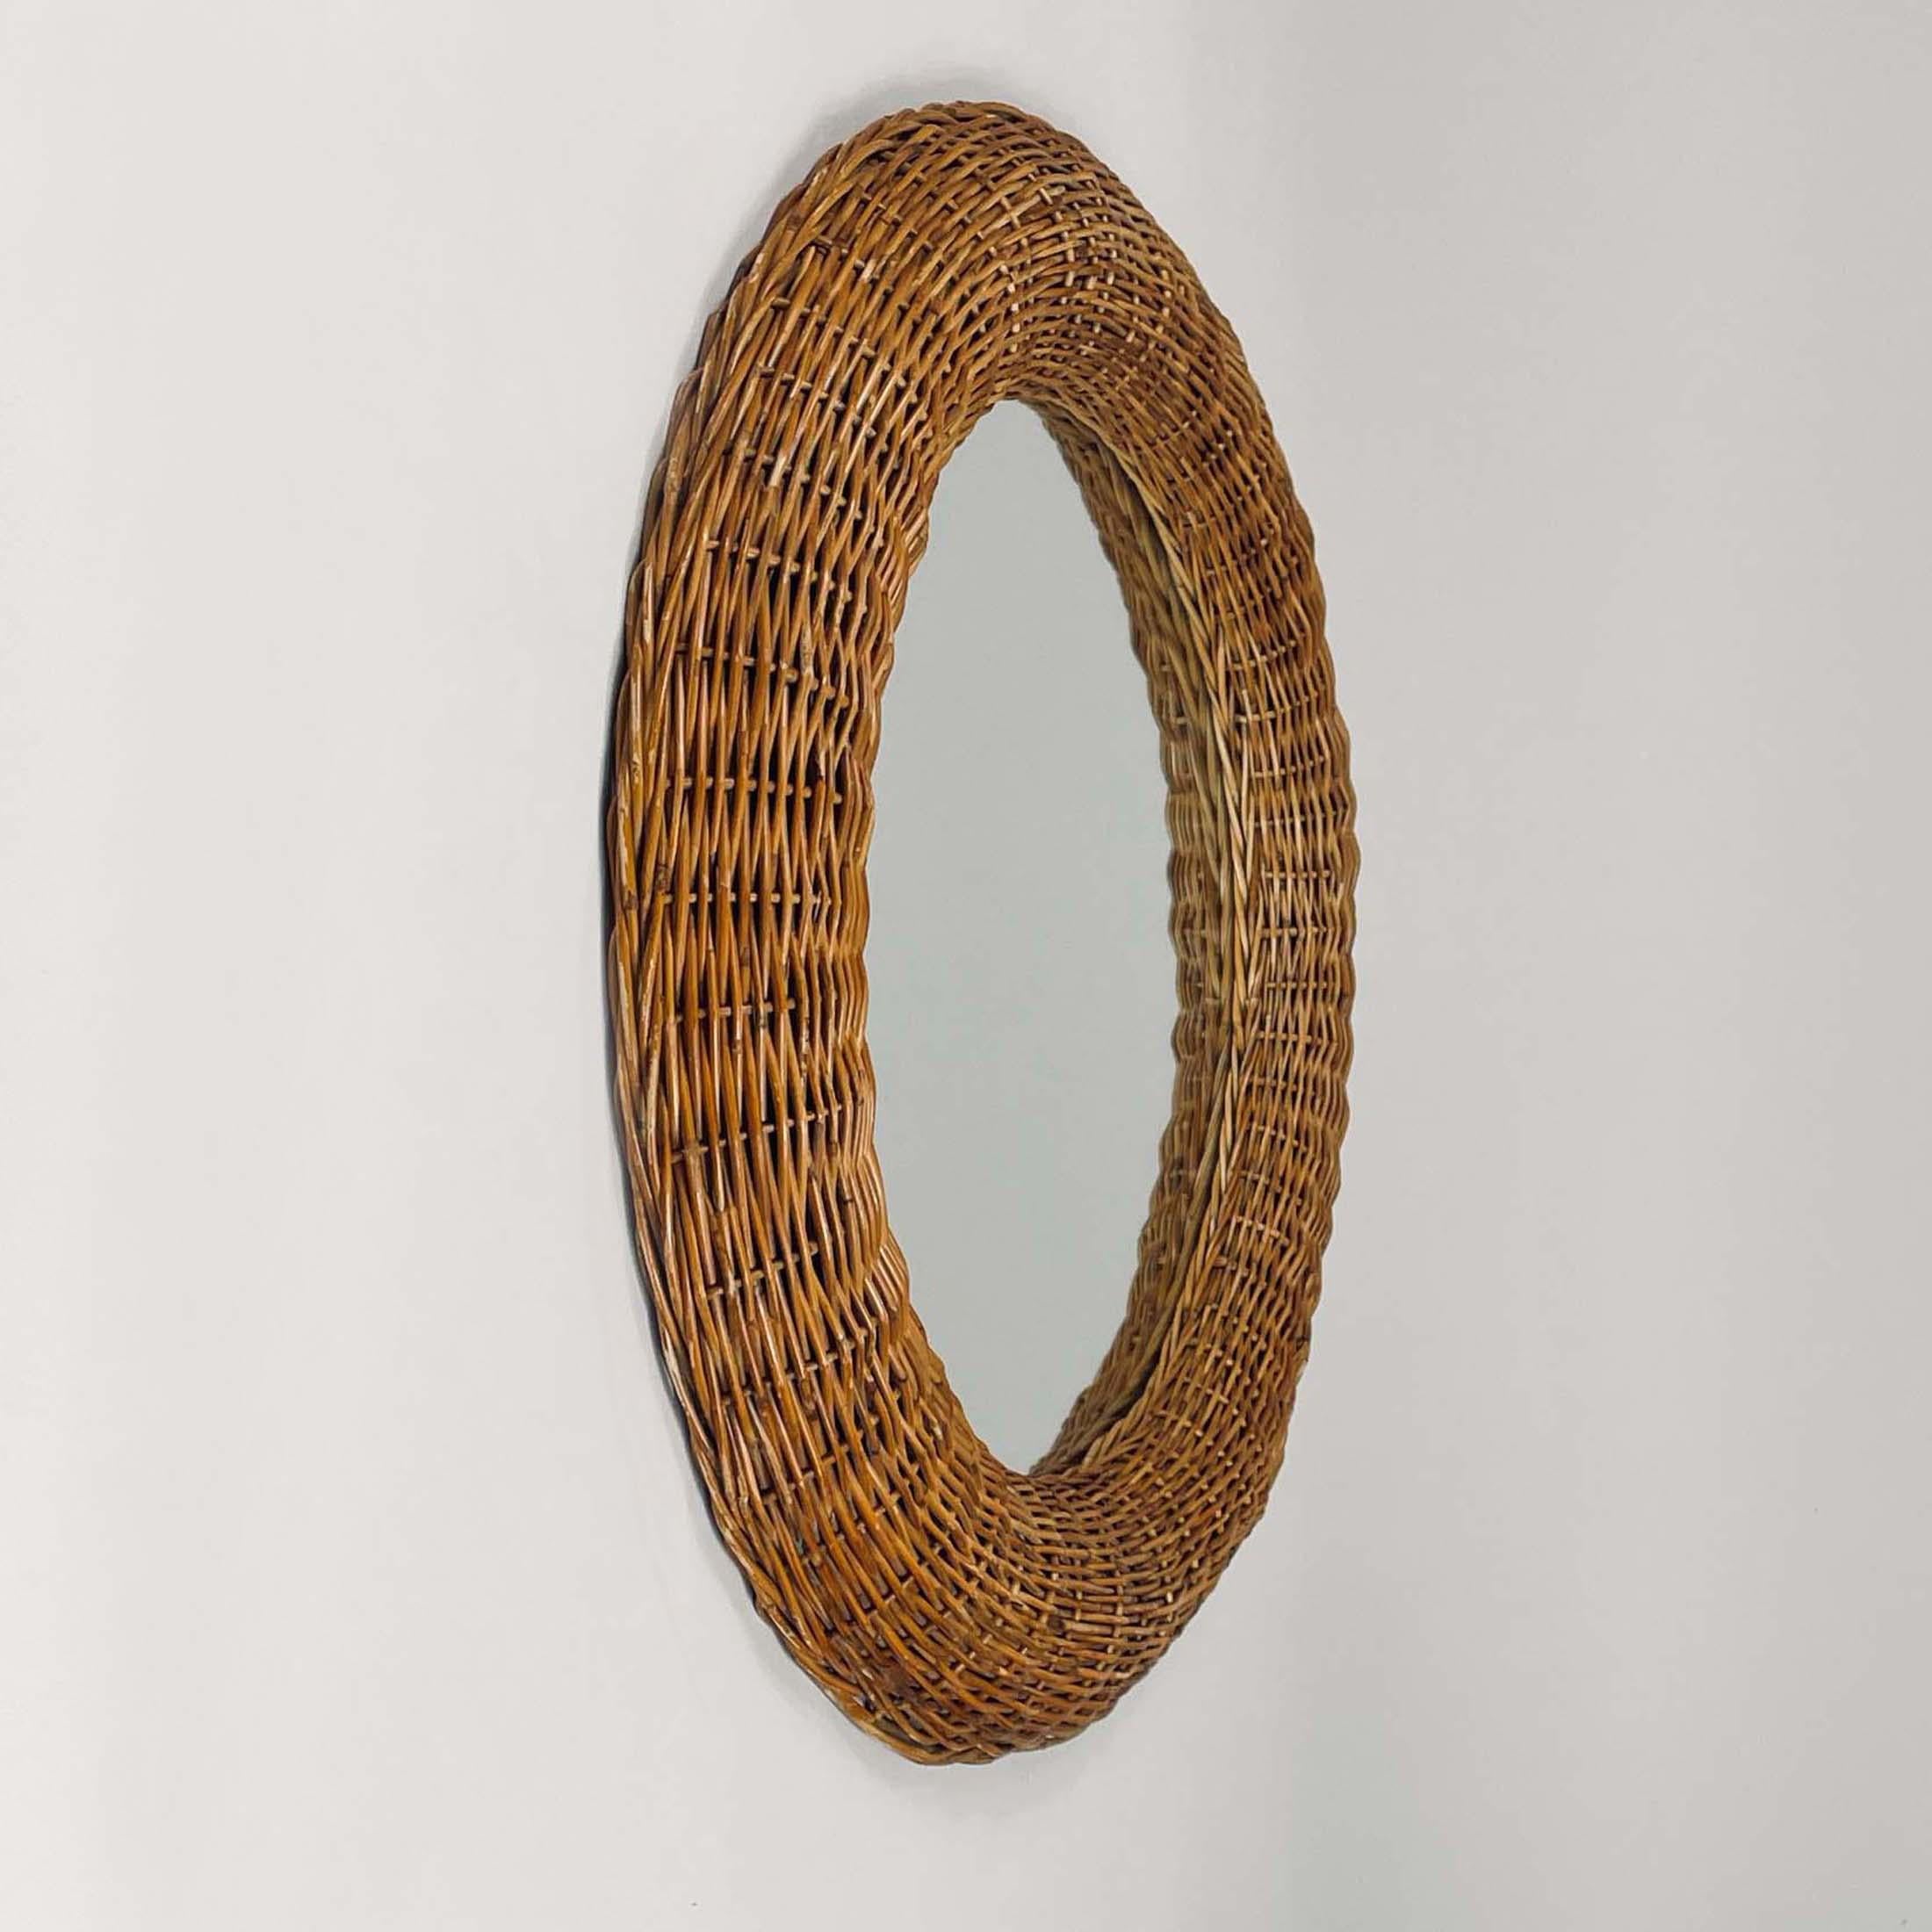 Riviera Style Round Woven Rattan Mirror, France 1950s For Sale 5